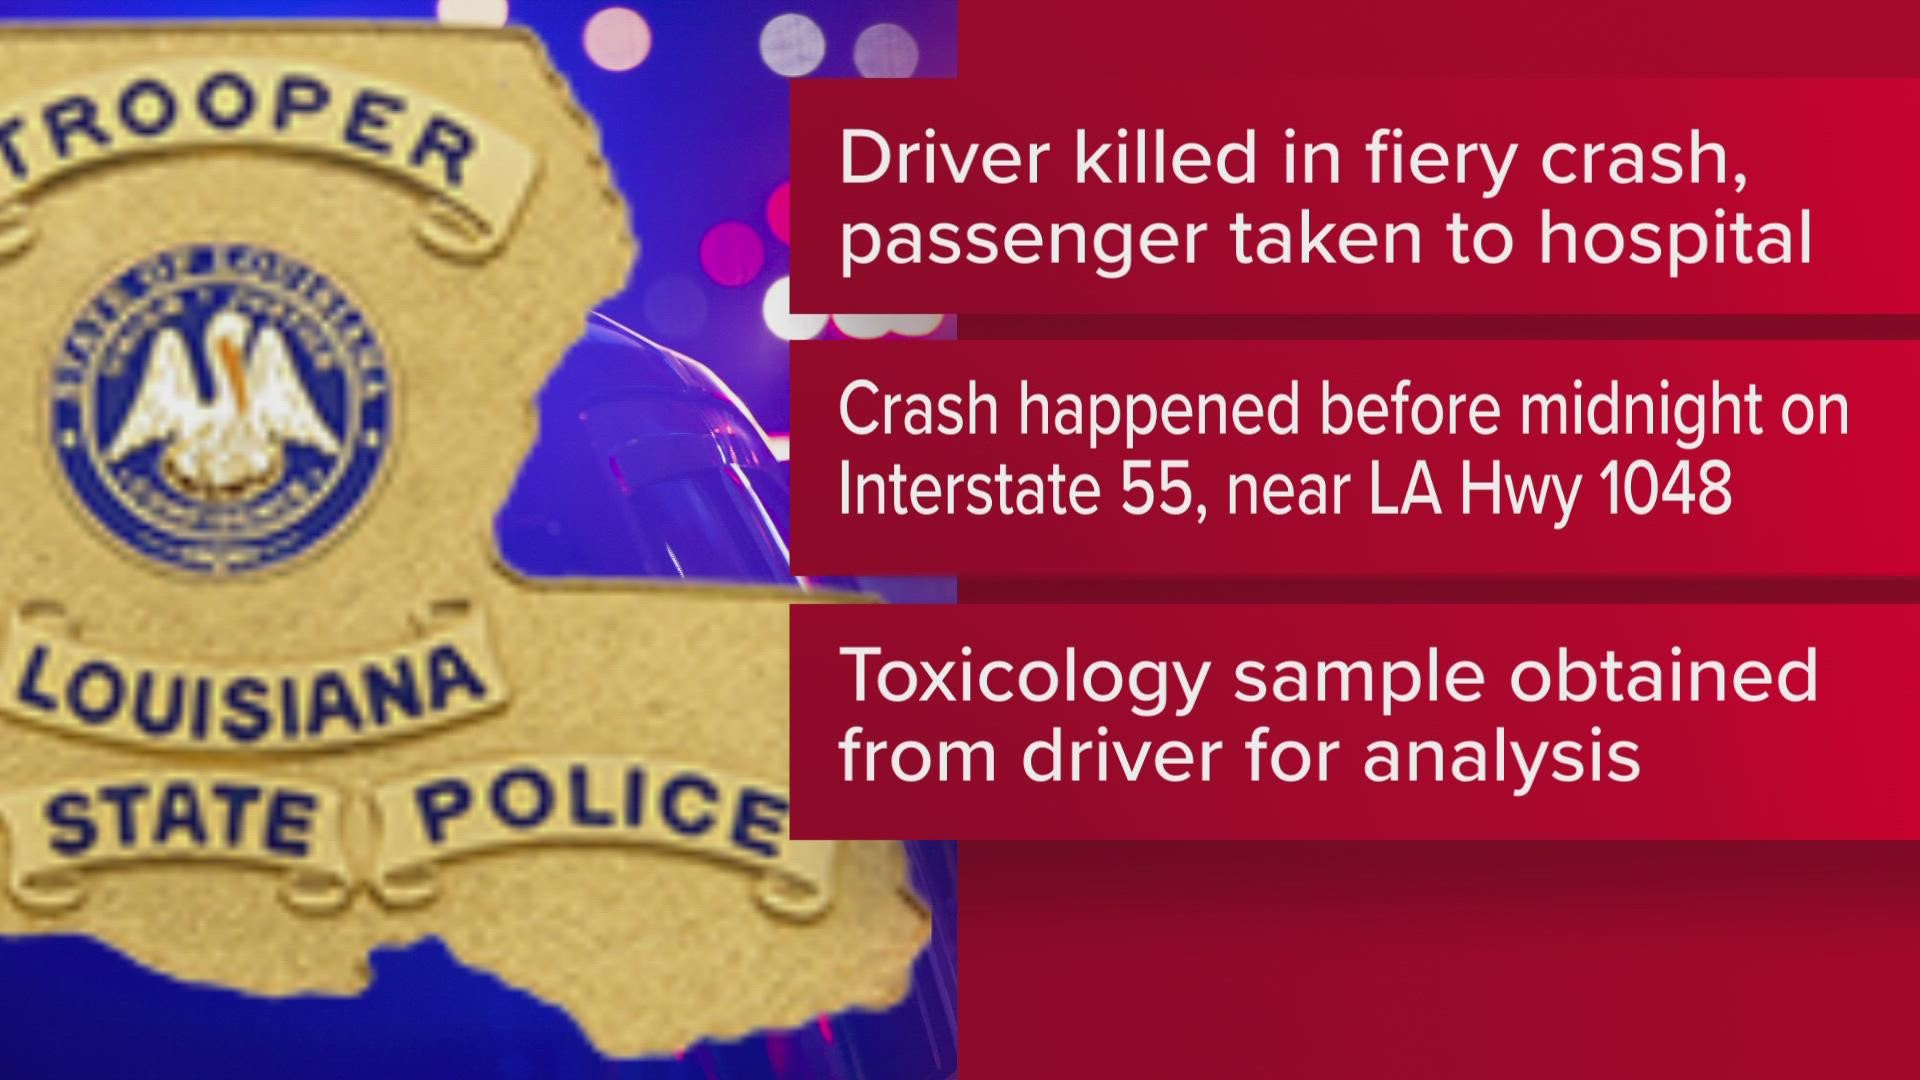 The identity of the driver has not been revealed.